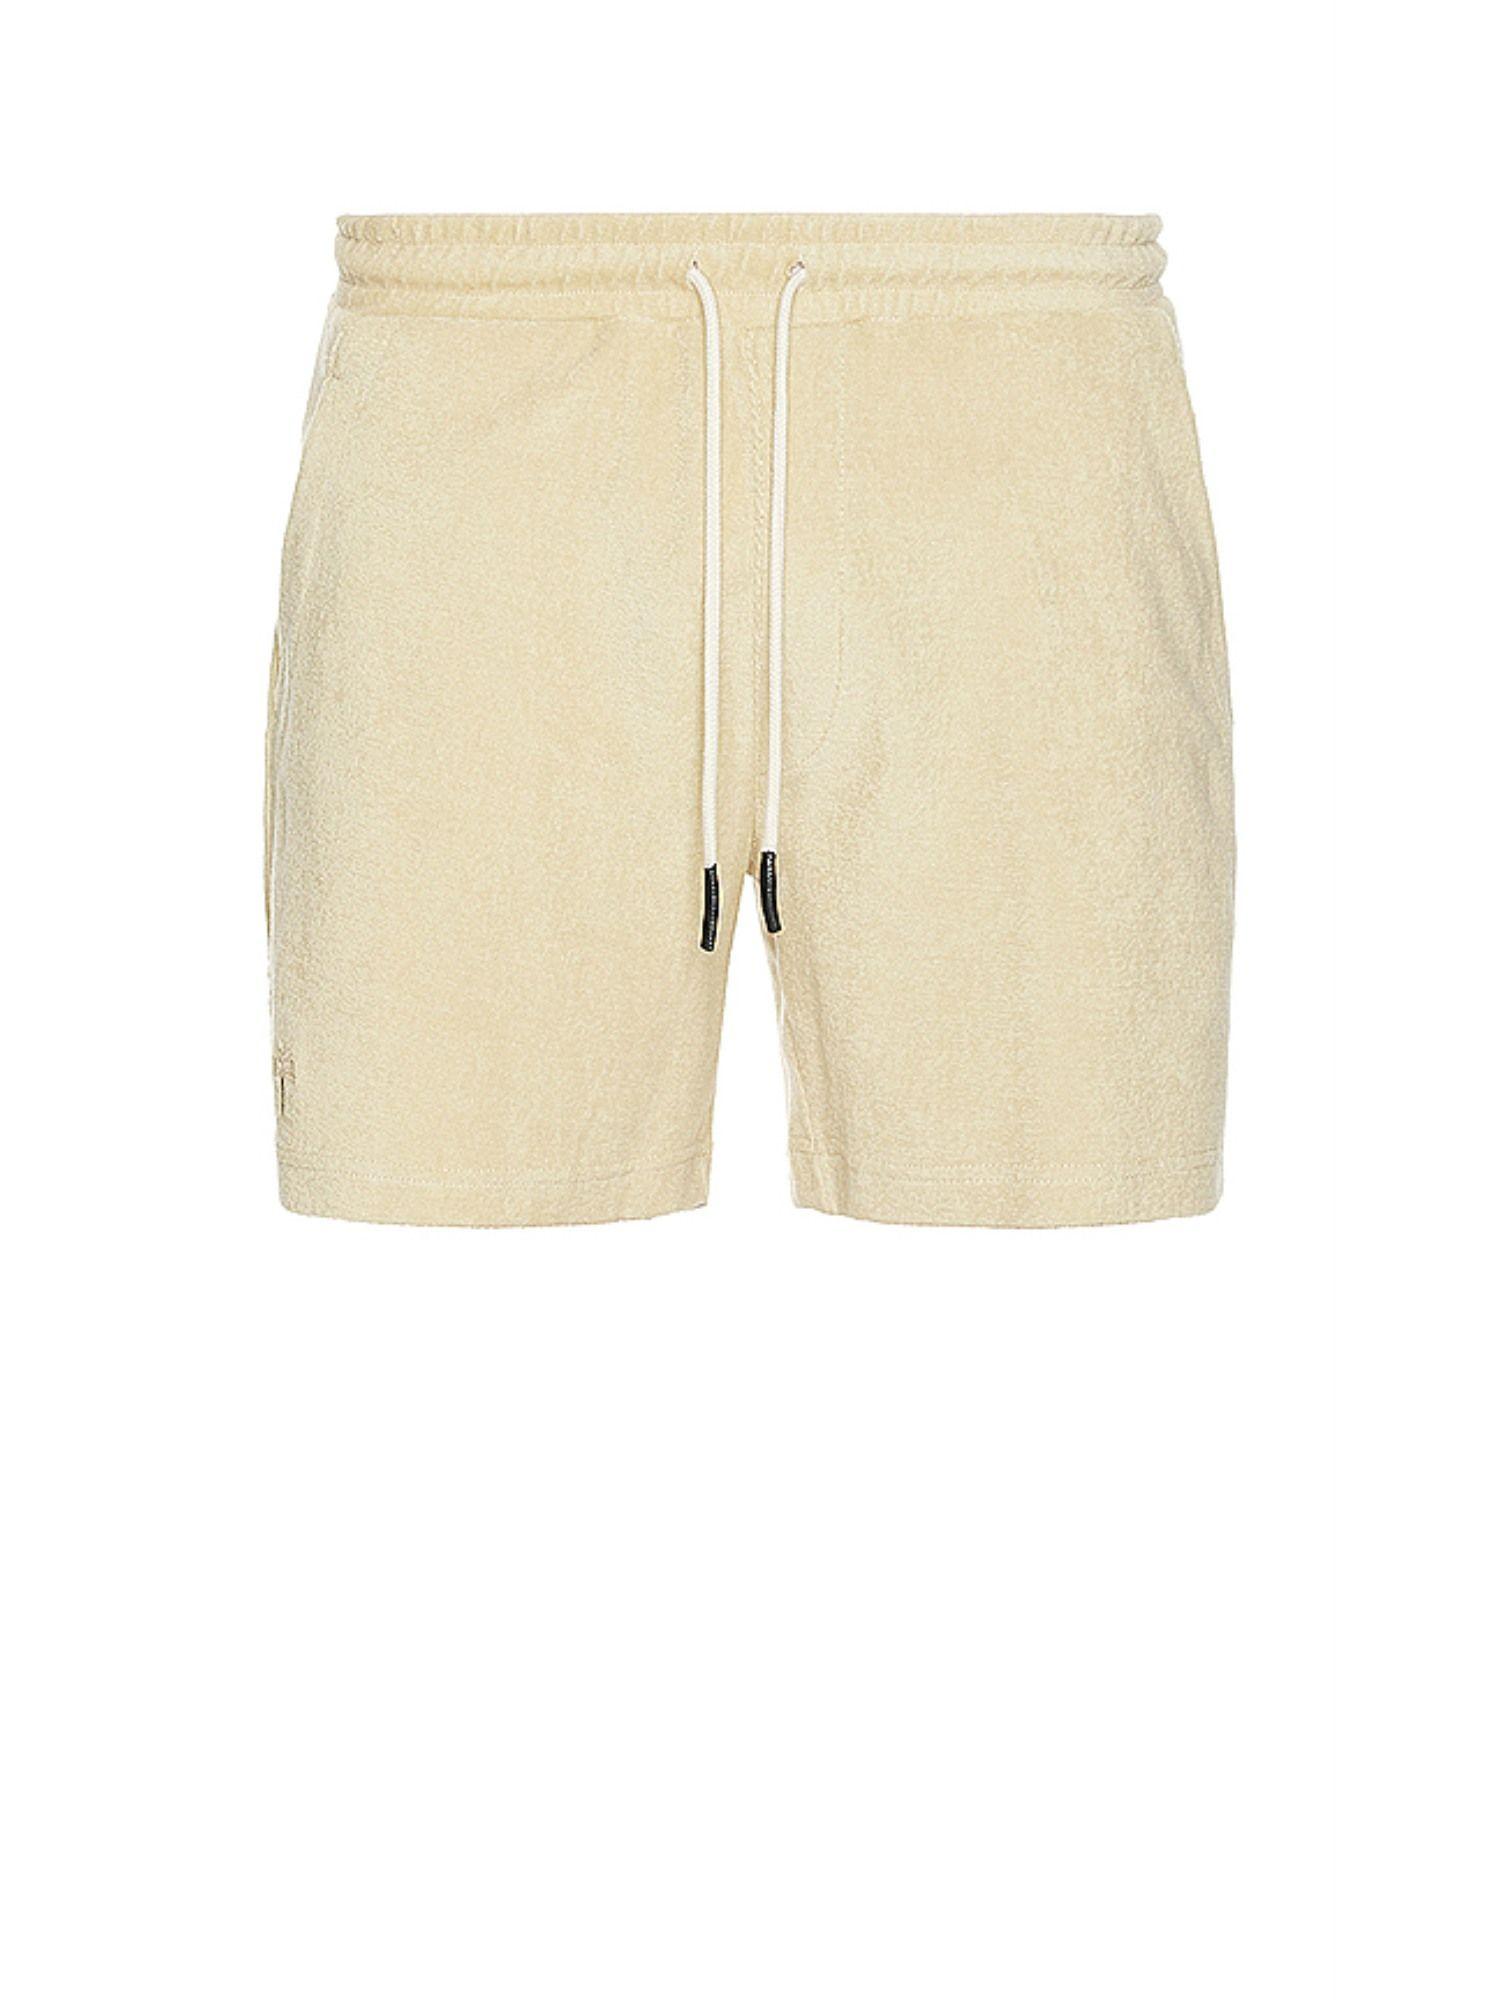 terry shorts